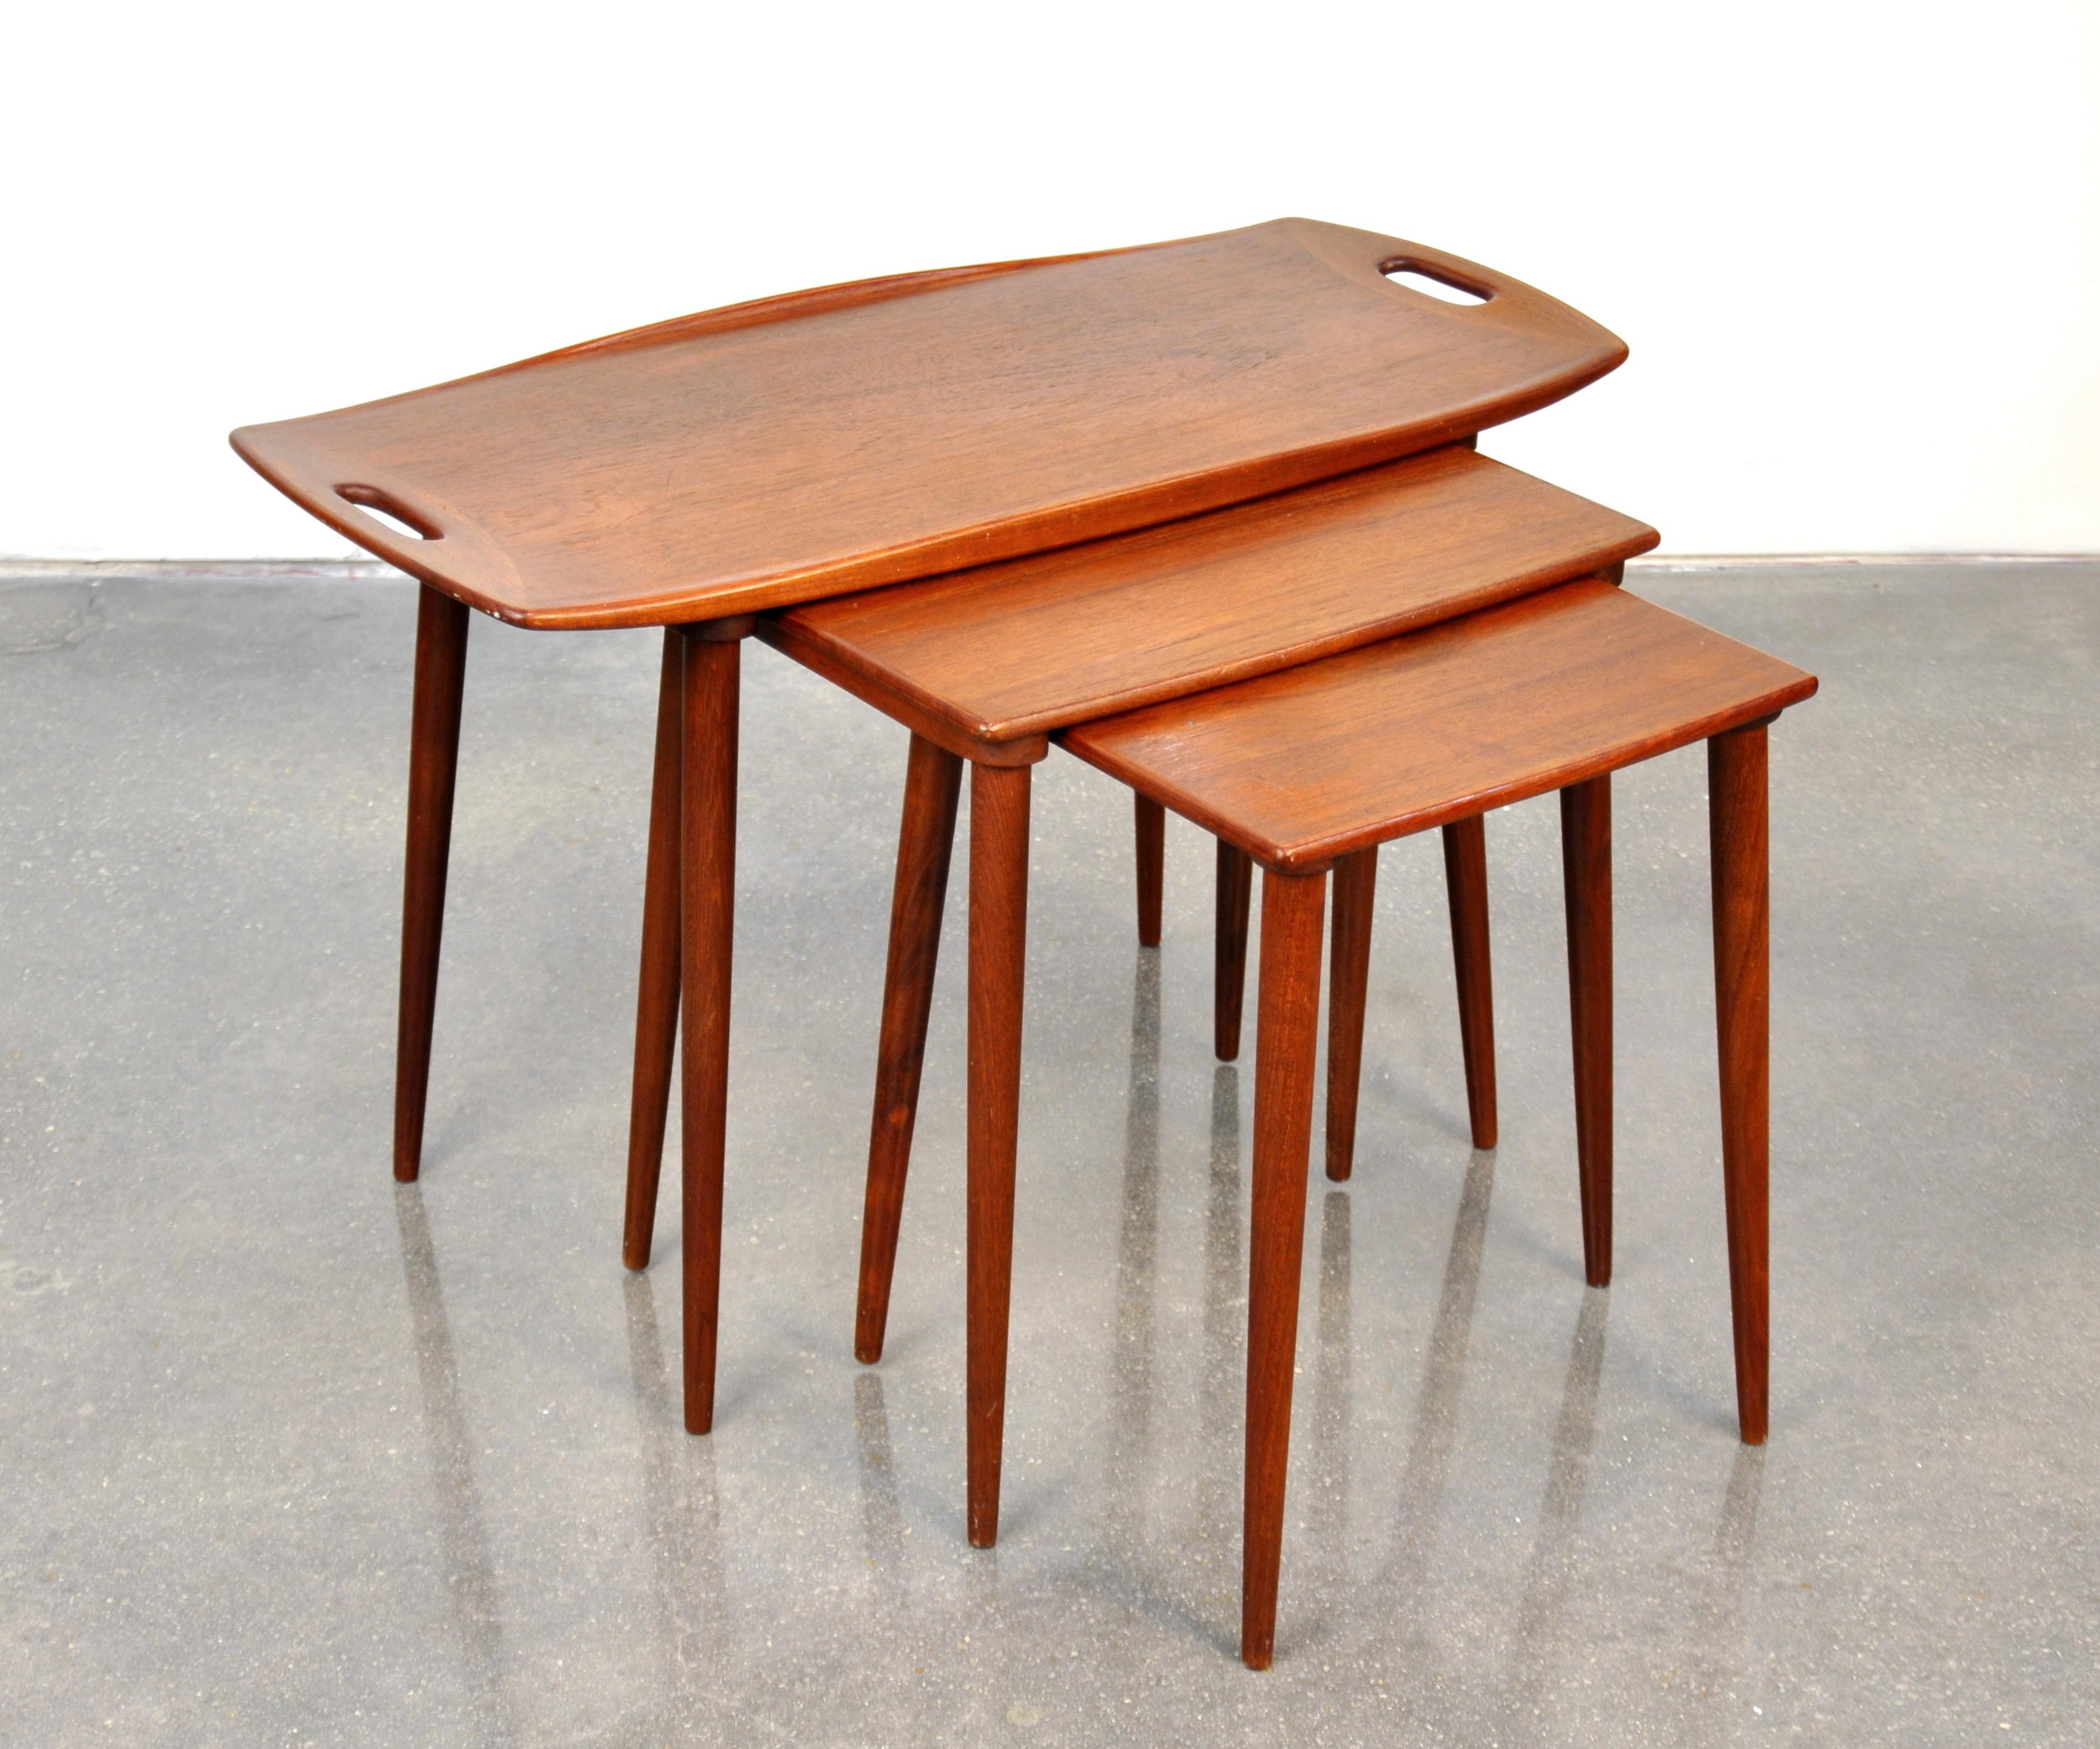 A vintage midcentury Danish modern teak tray table, with a pair of smaller nesting side or end tables, designed by Jens Quistgaard for Richard Nissen. The sculpted top of the largest table features finger cut-outs at each end, raised edges and